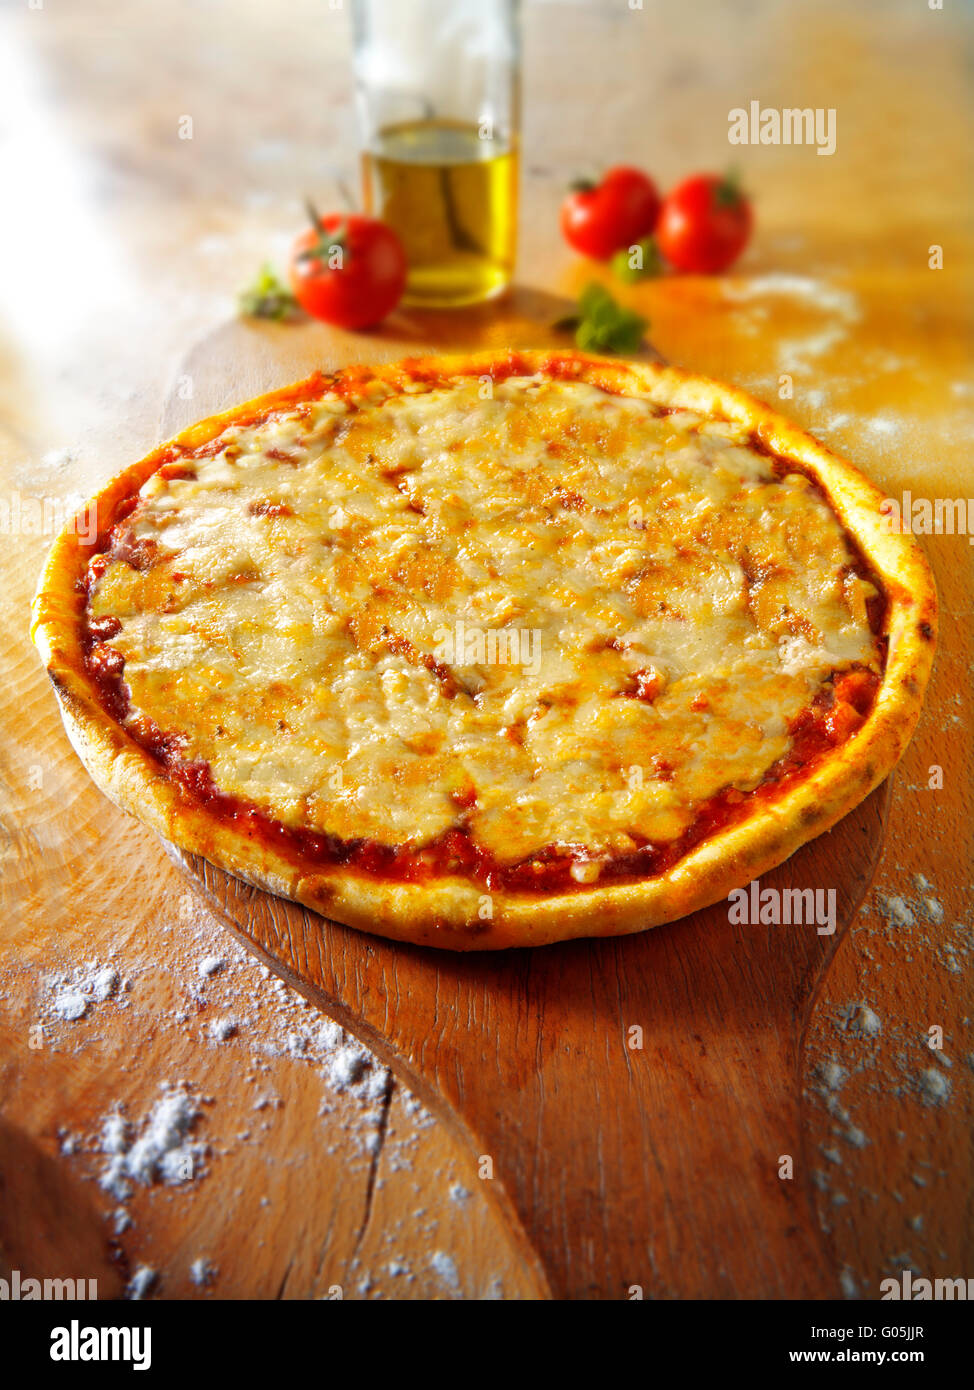 Cooked whole cheese and tomato Margherita pizza Stock Photo